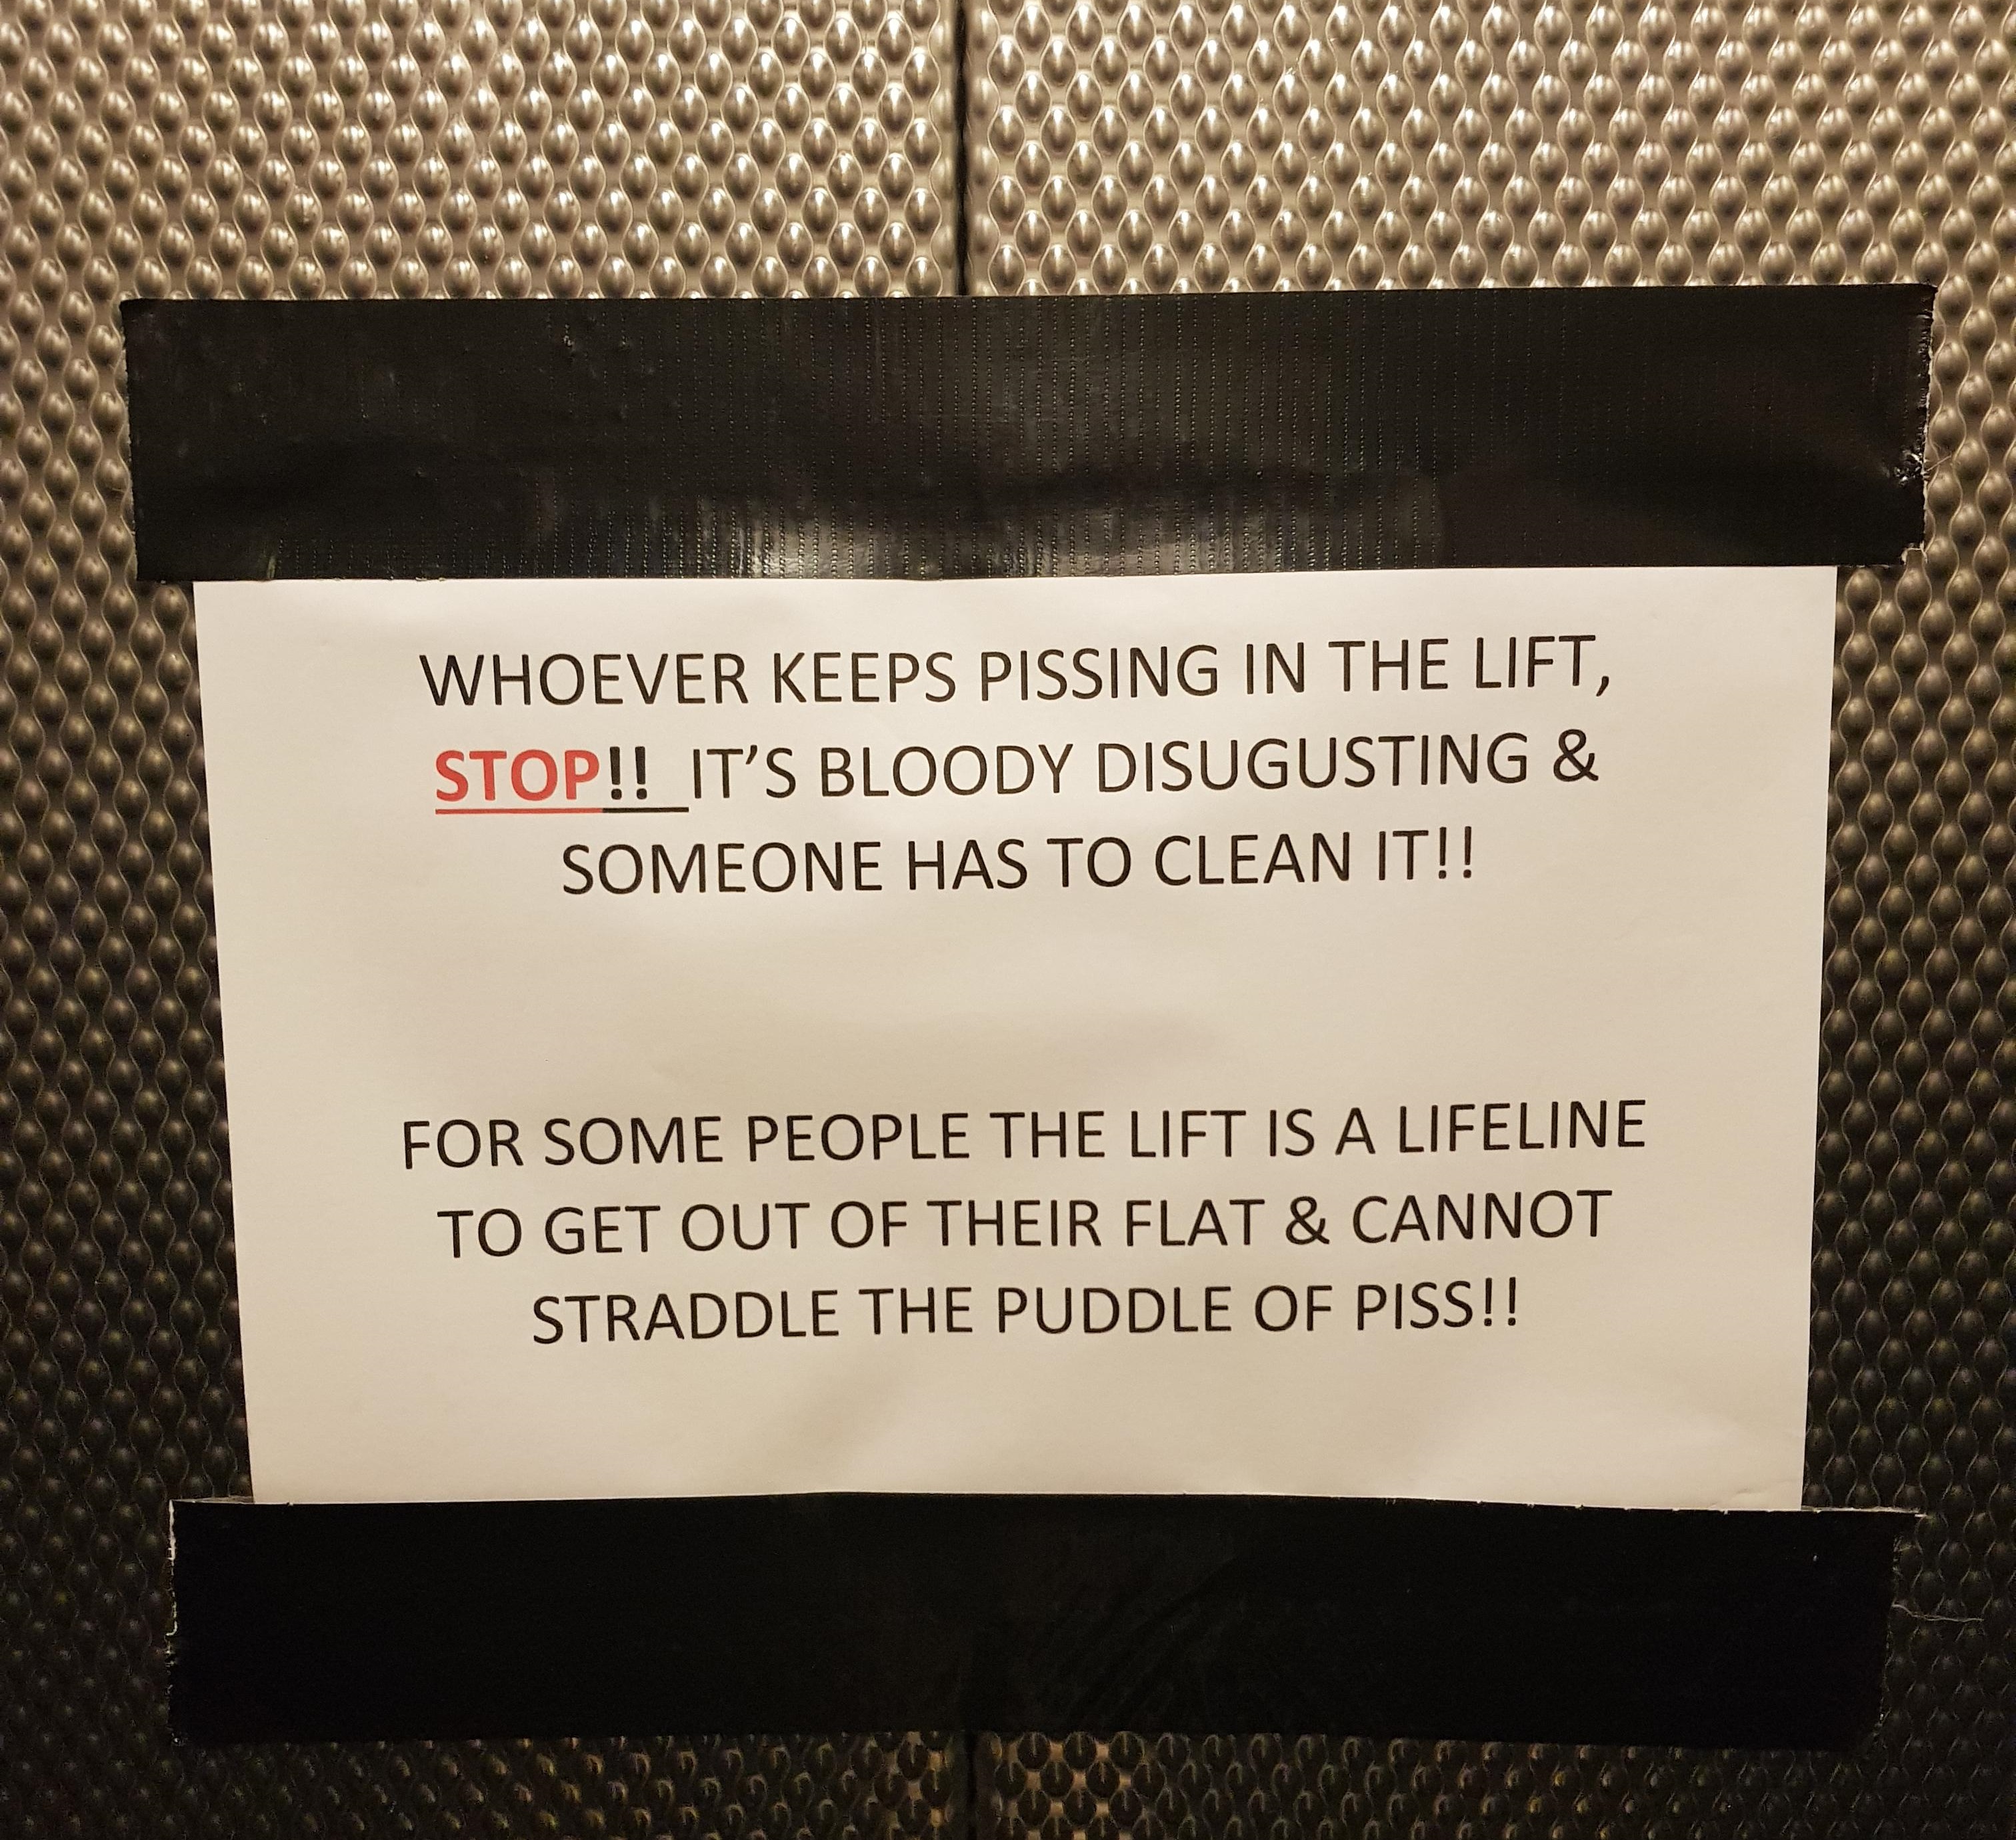 esplanade - theatres on the bay - Whoever Keeps Pissing In The Lift, Stop!! It'S Bloody Disugusting & Someone Has To Clean It!! For Some People The Lift Is A Lifeline To Get Out Of Their Flat & Cannot Straddle The Puddle Of Piss!!